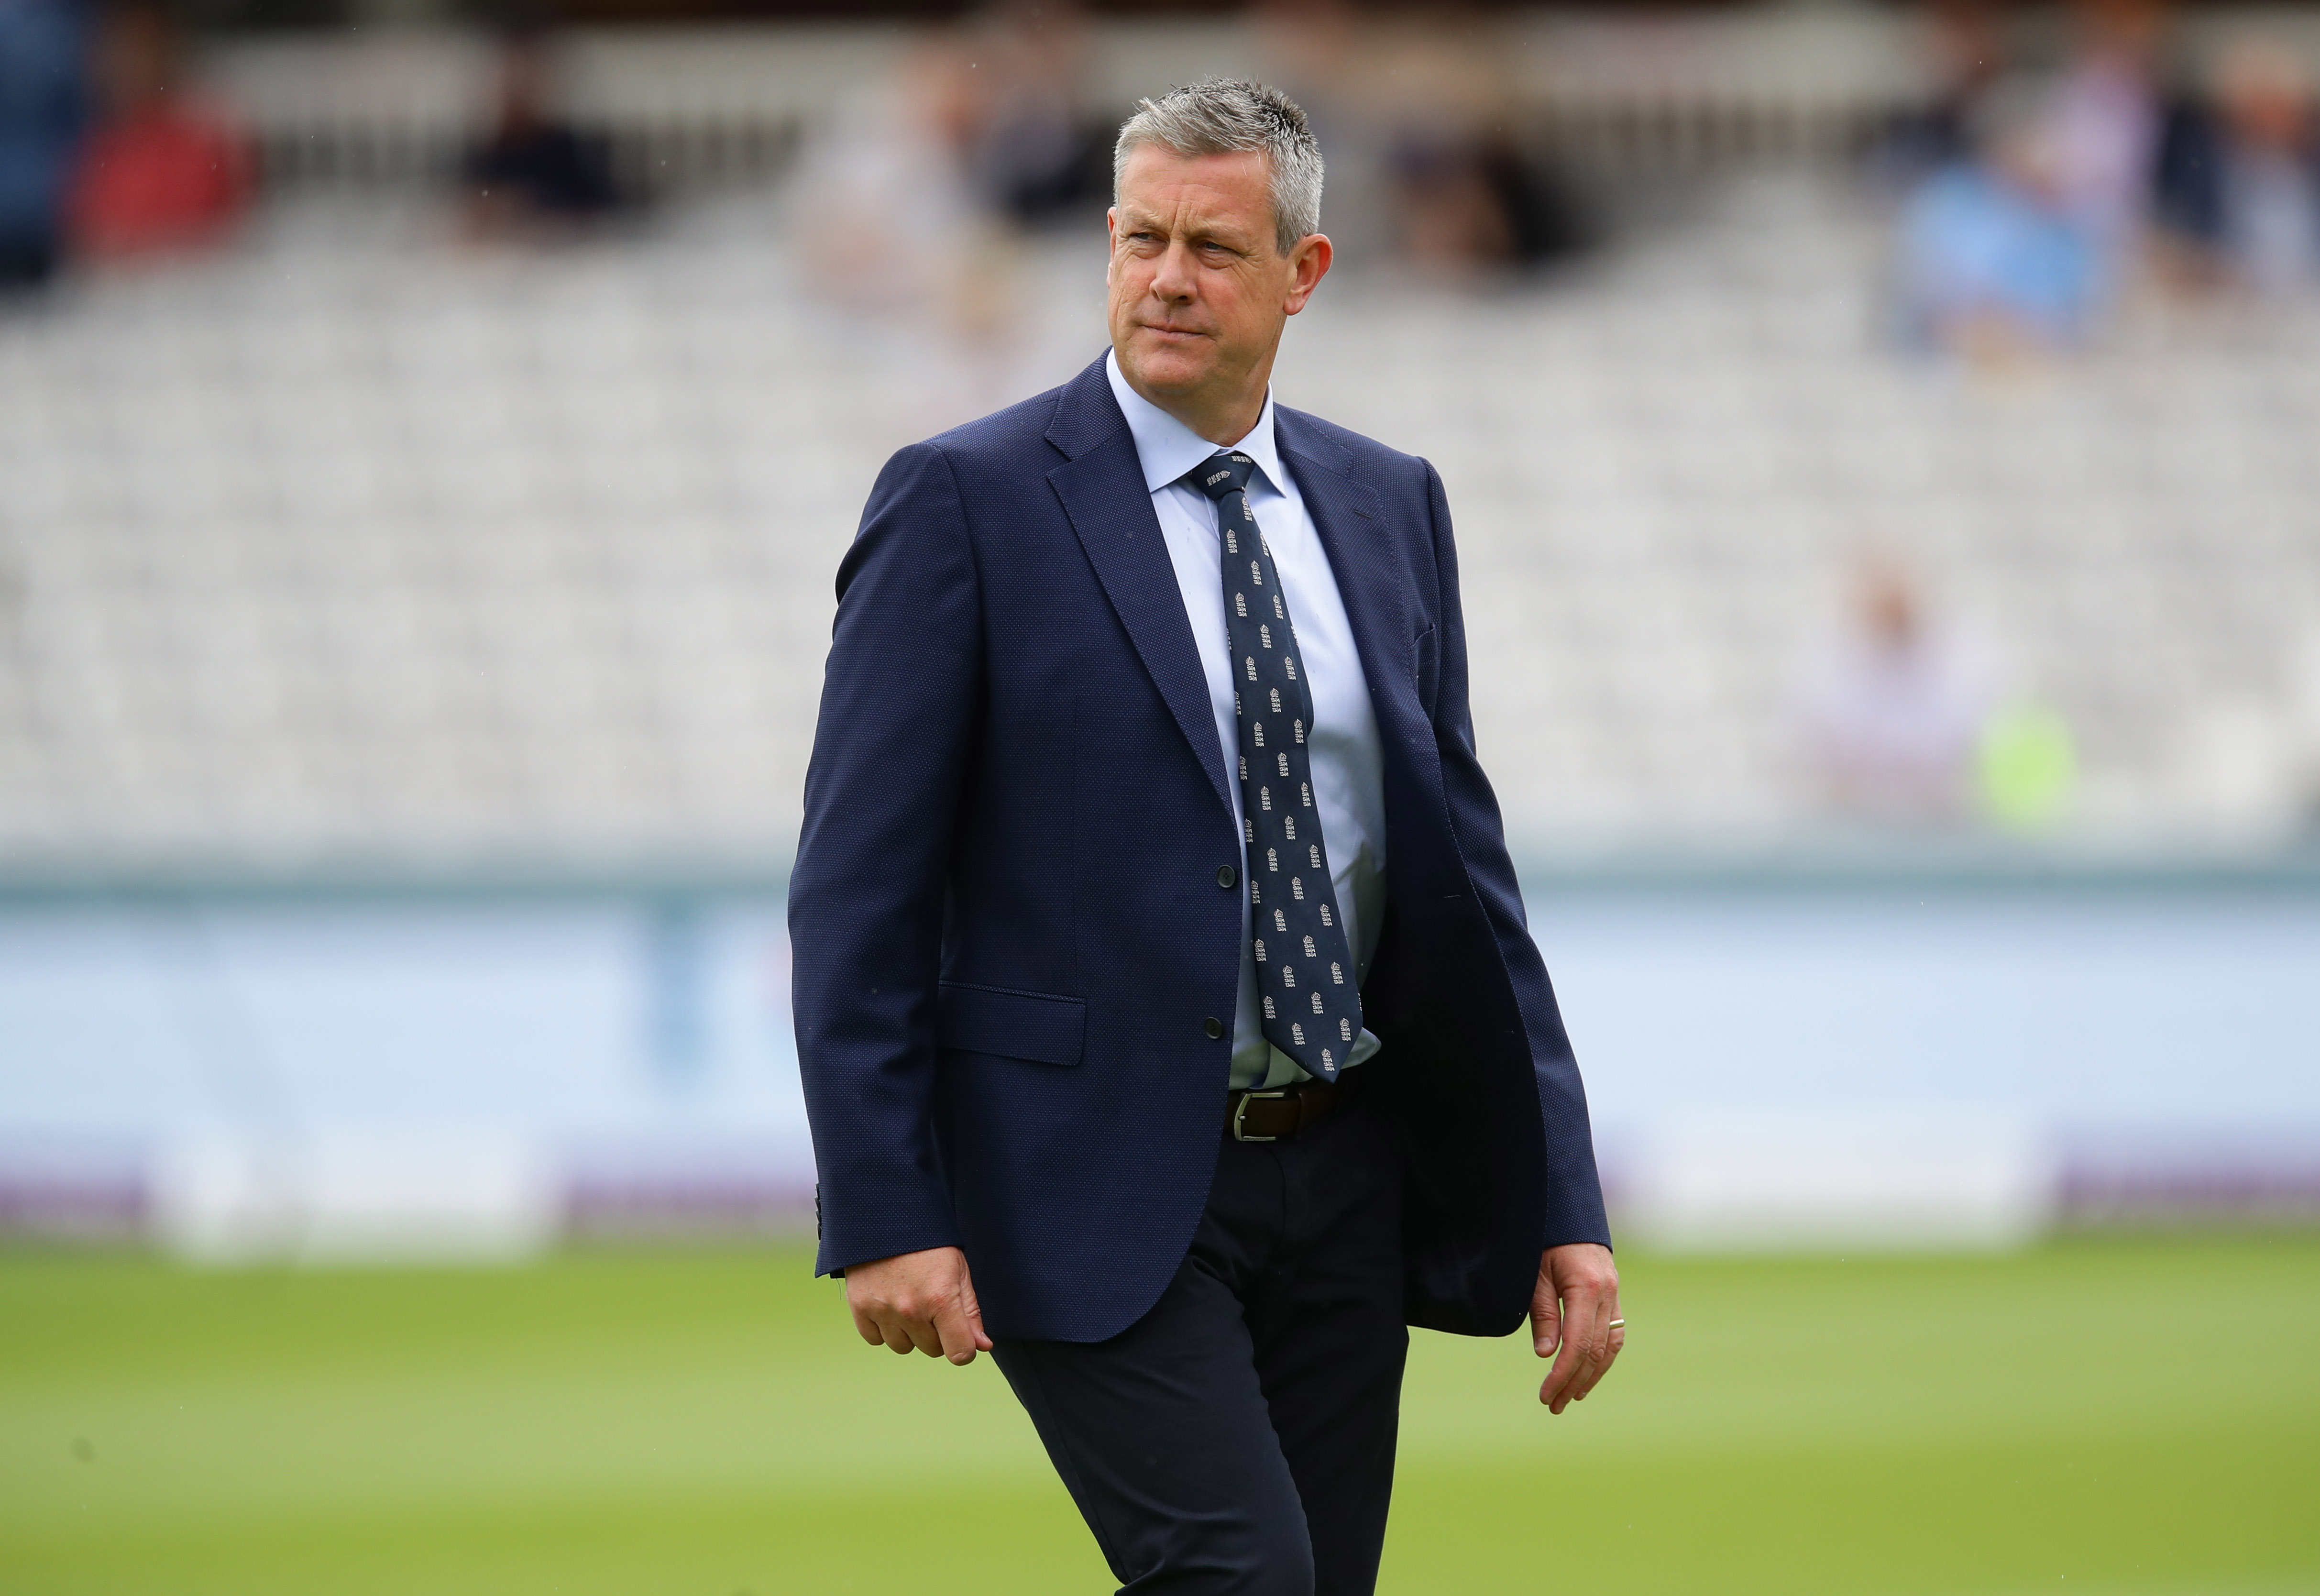 Cricket - Second One Day International - England v Pakistan - Lord's, London, Britain - July 10, 2021 England director of cricket Ashley Giles Action Images via Reuters/David Klein